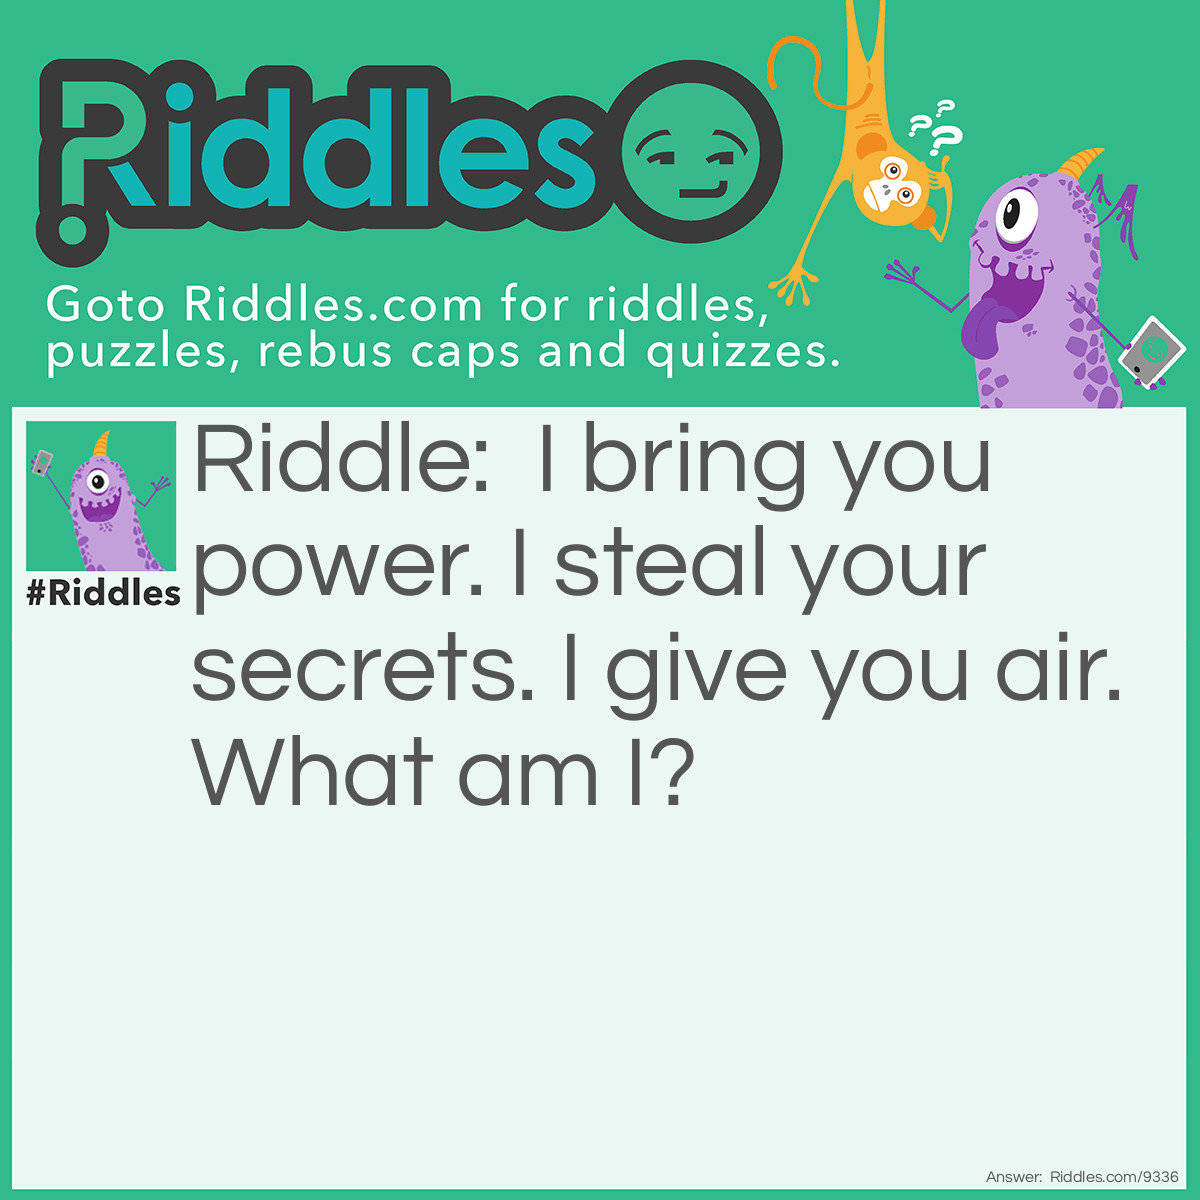 Riddle: I bring you power. I steal your secrets. I give you air. What am I? Answer: I'm a plant.